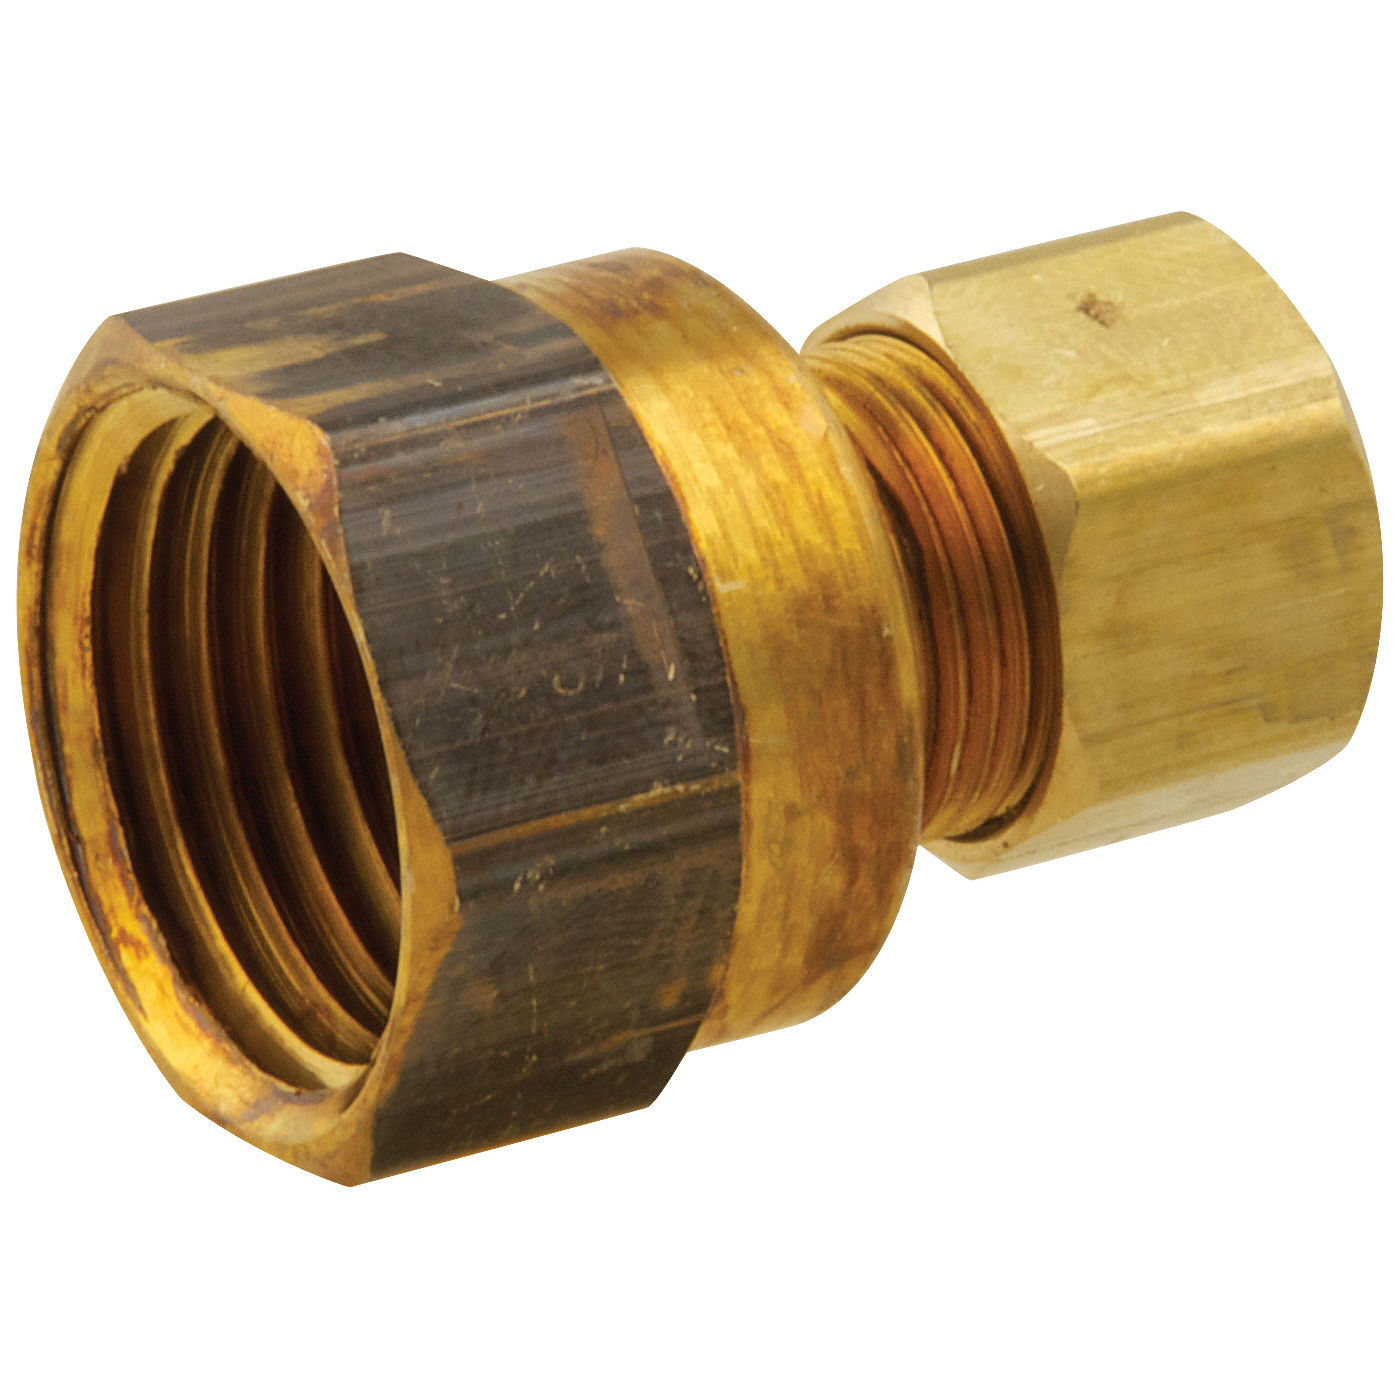 Compression fitting - Female reducing adapter - Master Plumber®